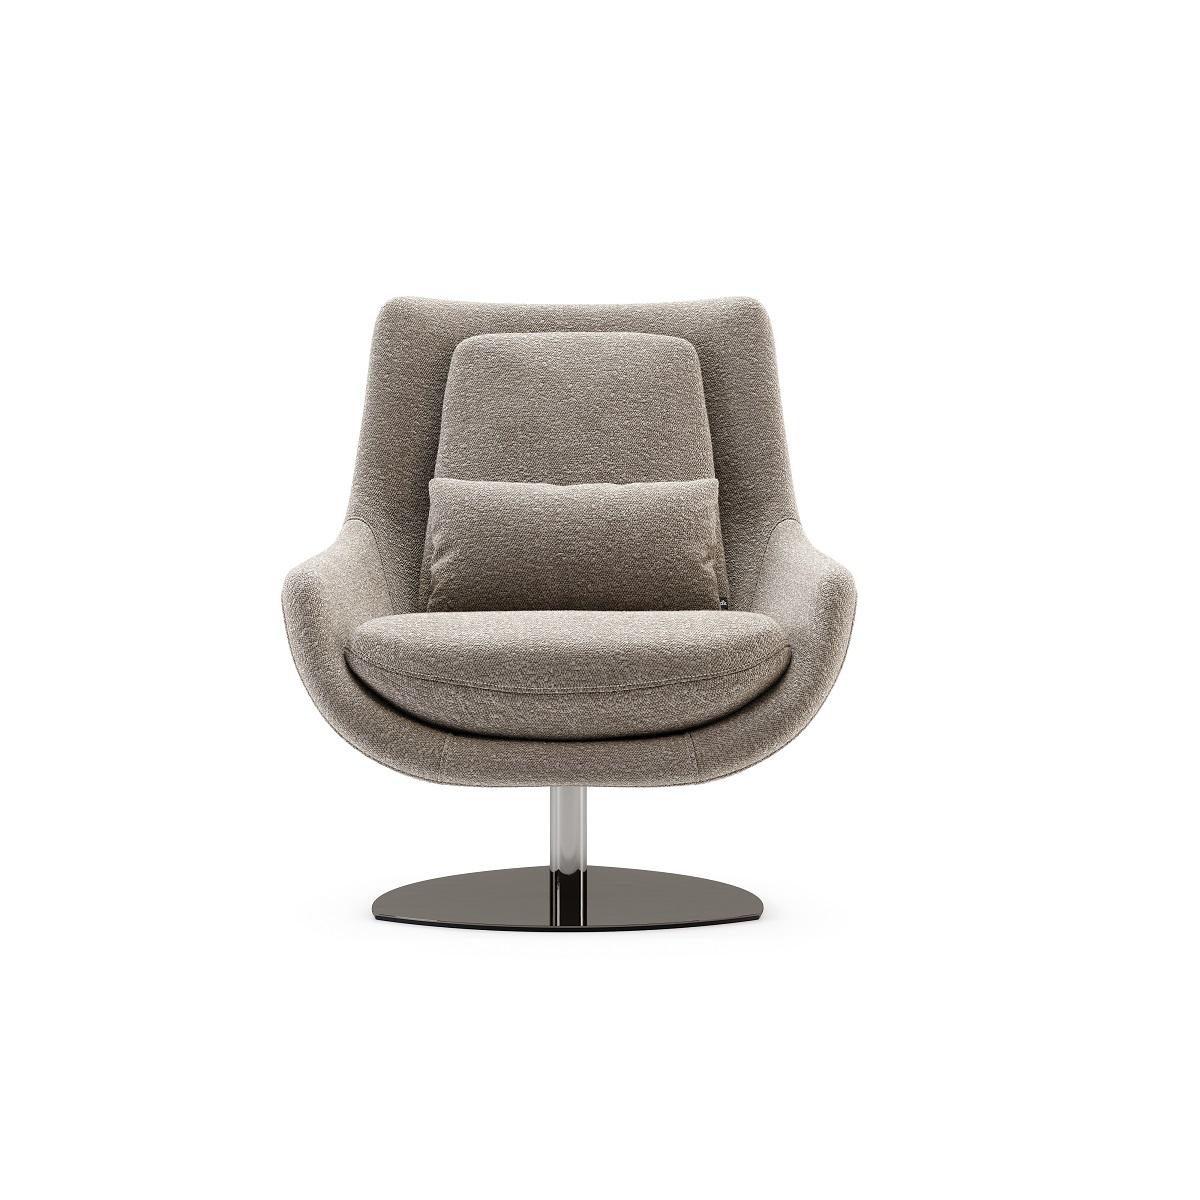 Swivel lounge chair with a curved body shape. The metallic  base can swivel 360 degrees. 

Shown here in Leather and Columbia Tofee Fabric.
Stainless steel base in polished Copper. 
See photos metal base colors. 

Available in COM, COM required 6